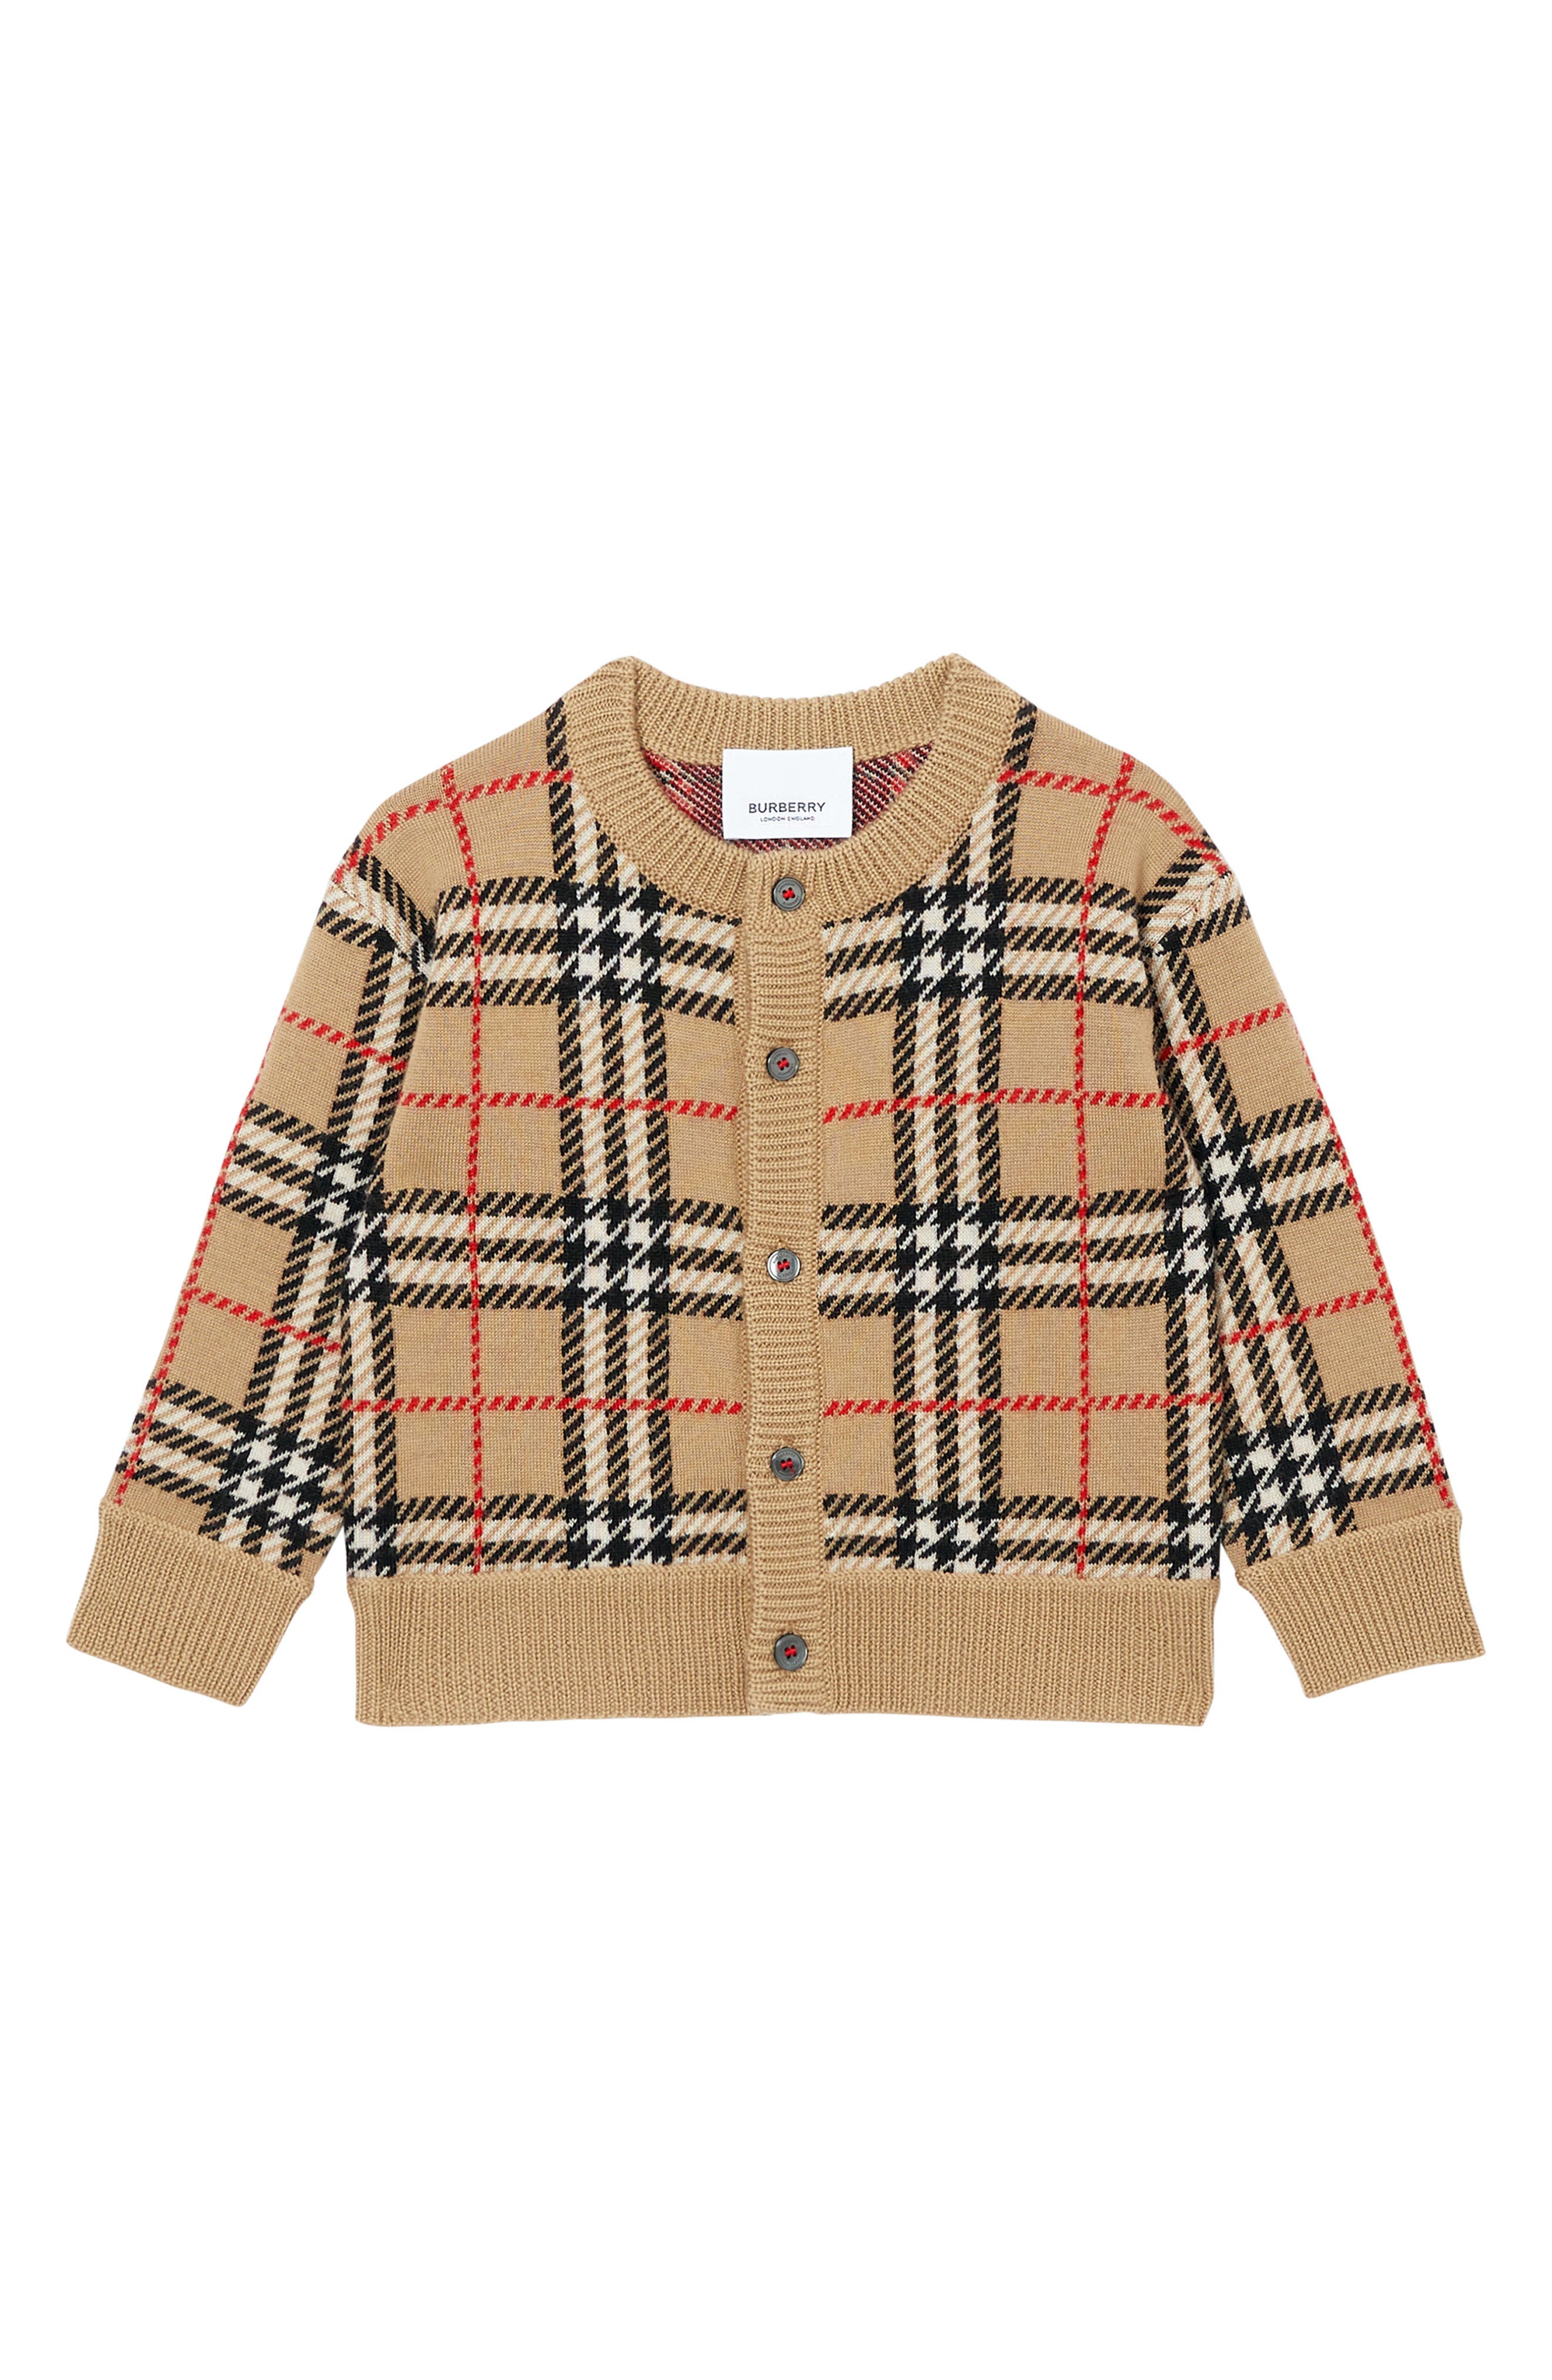 burberry toddler sweater